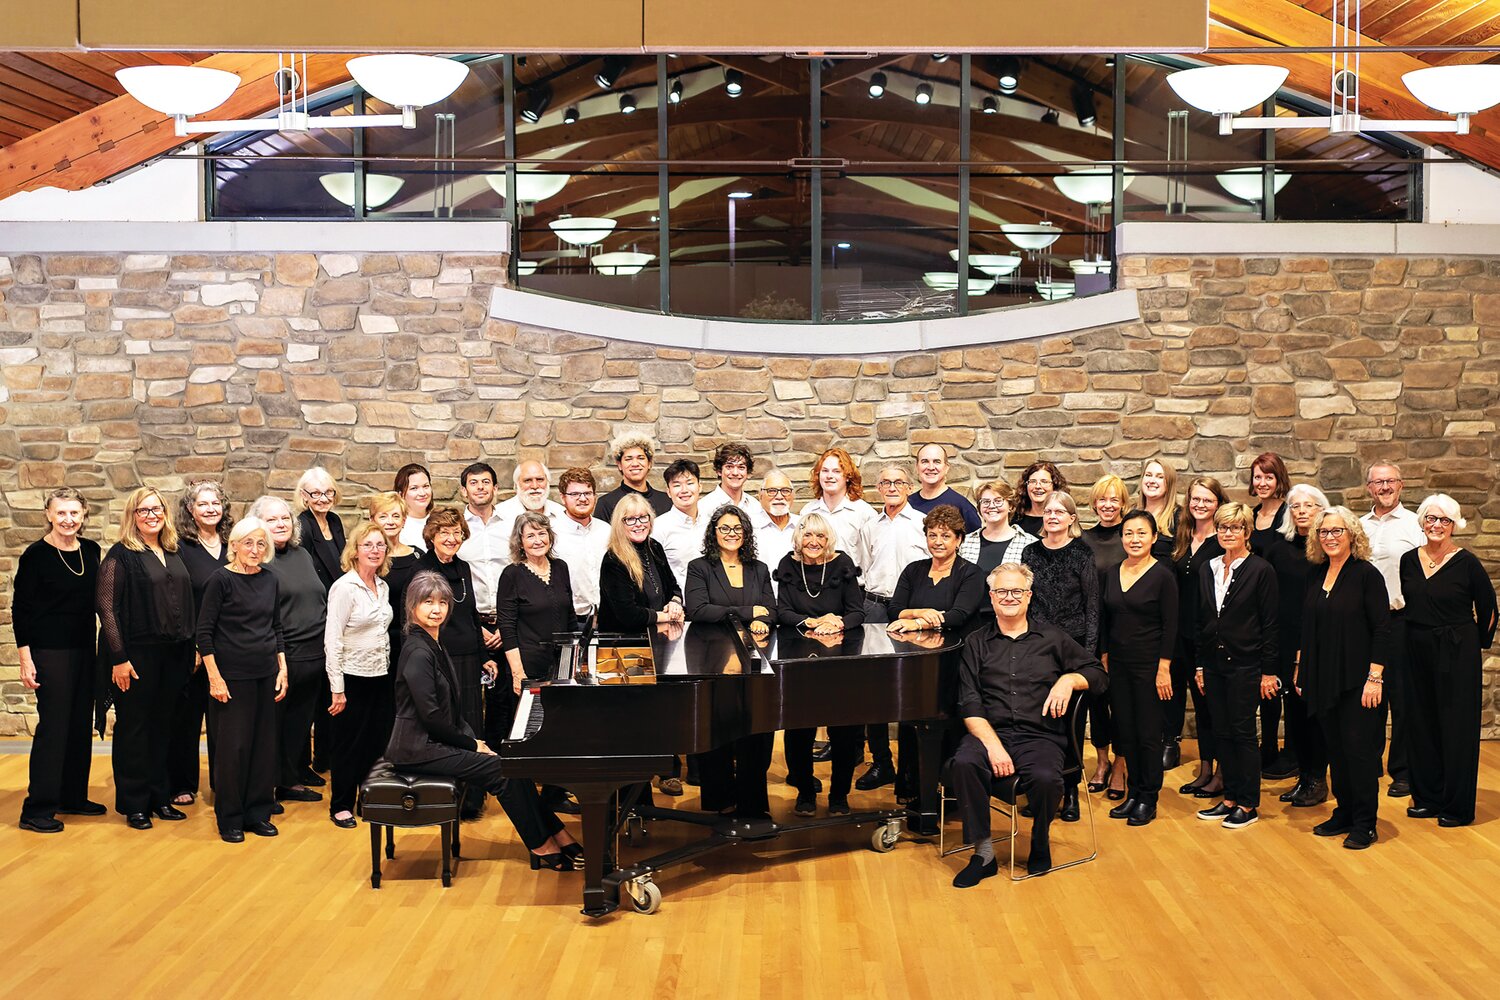 Voices Chorale NJ will be joined by the Berks Sinfonietta chamber orchestra for a concert titled “In Conversation with Haydn.”